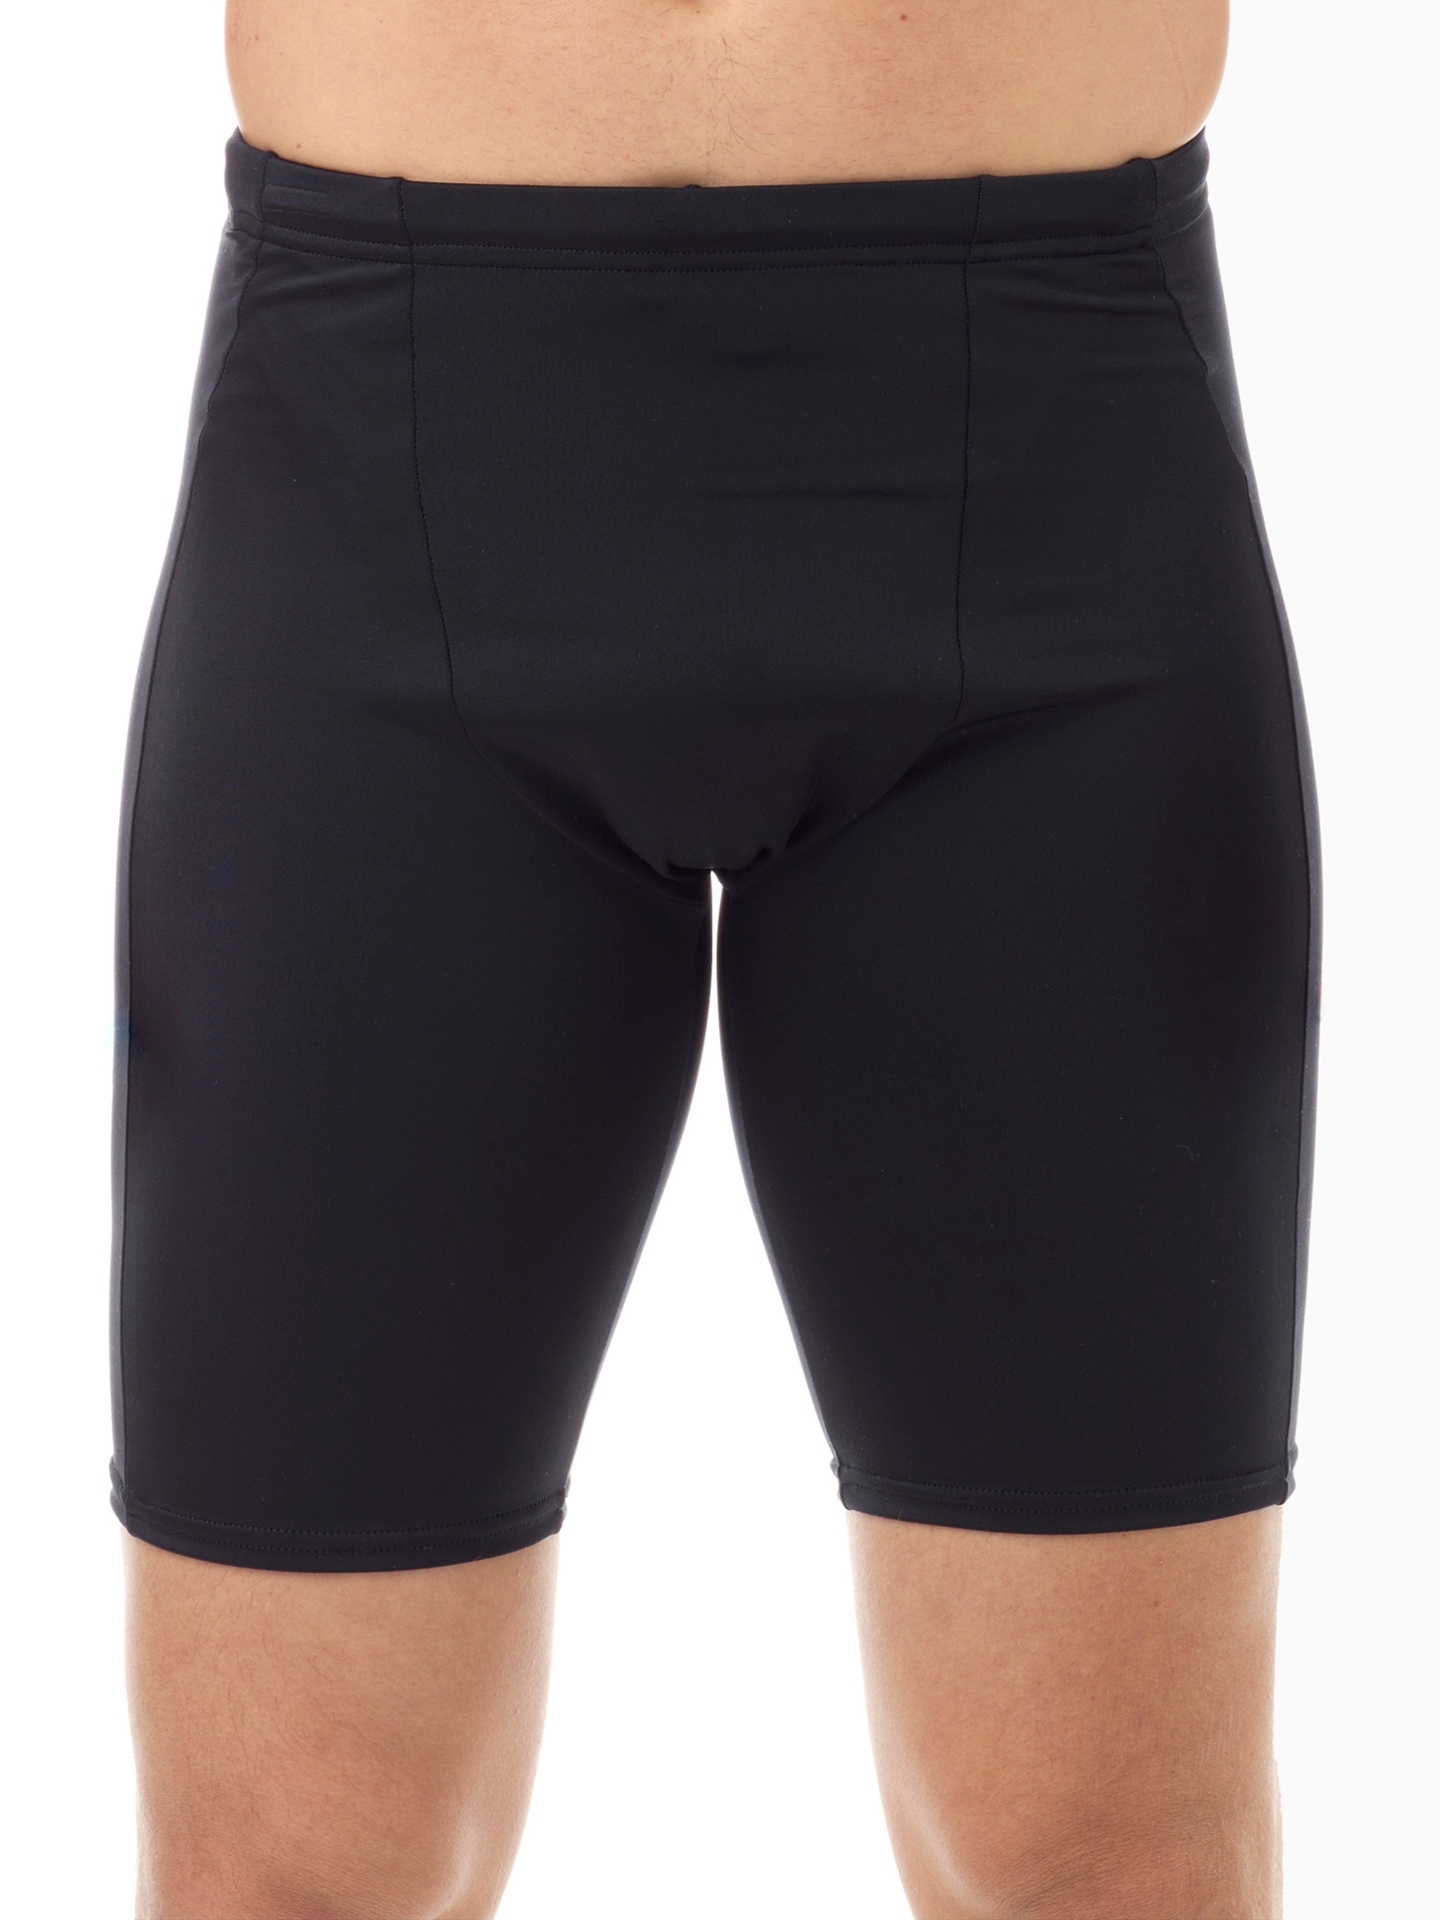 Compression Swim Shorts for FTM. FTM Chest Binders for Trans Men by  Underworks